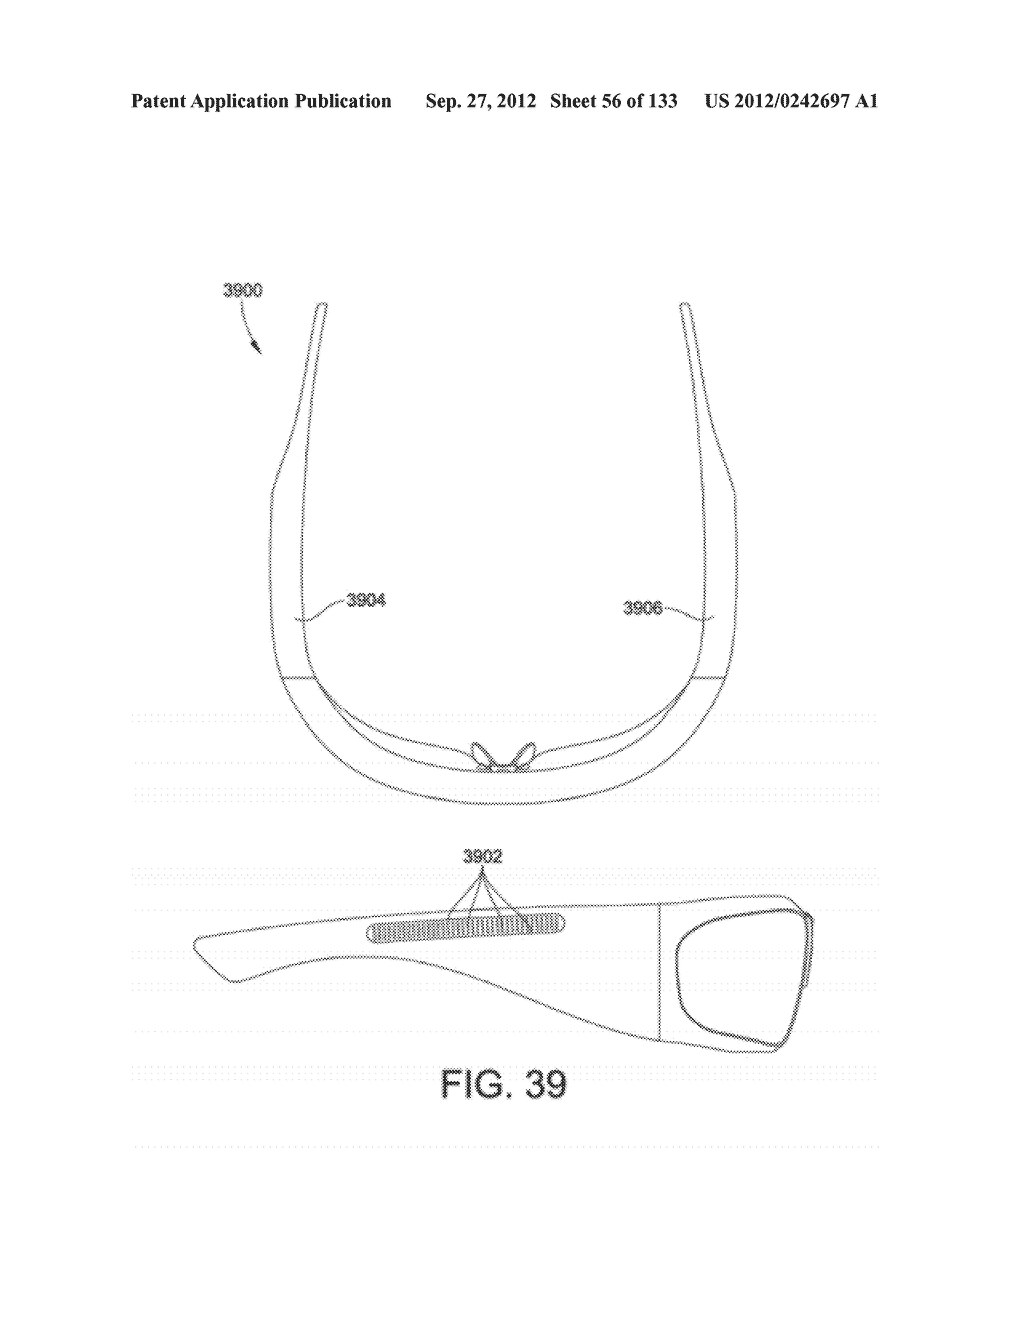 SEE-THROUGH NEAR-EYE DISPLAY GLASSES WITH THE OPTICAL ASSEMBLY INCLUDING     ABSORPTIVE POLARIZERS OR ANTI-REFLECTIVE COATINGS TO REDUCE STRAY LIGHT - diagram, schematic, and image 57